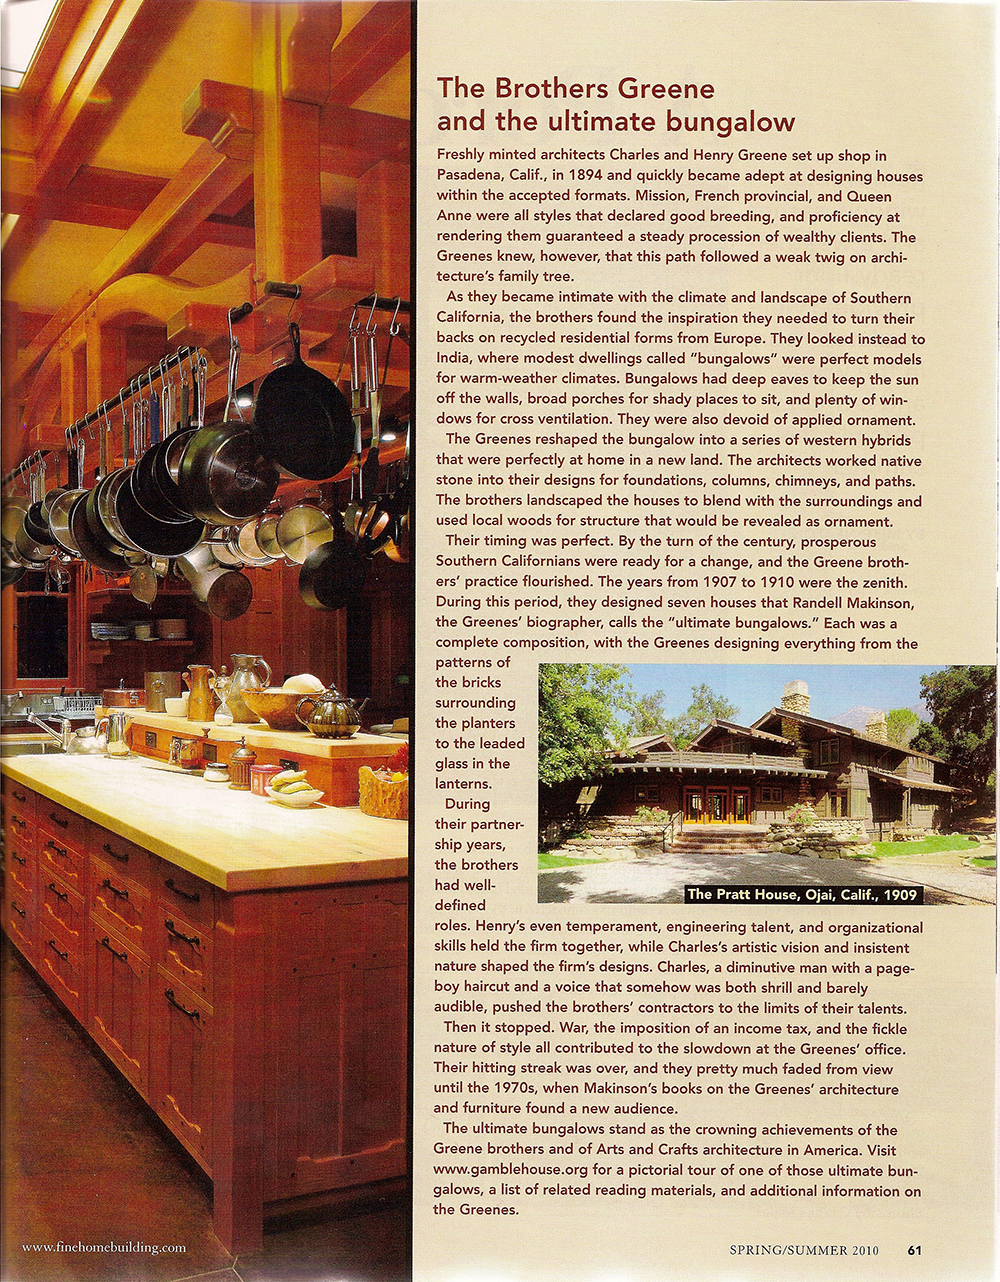 Page 9 of Fine Homebuilding summer 2010, carrying Archive Designs items